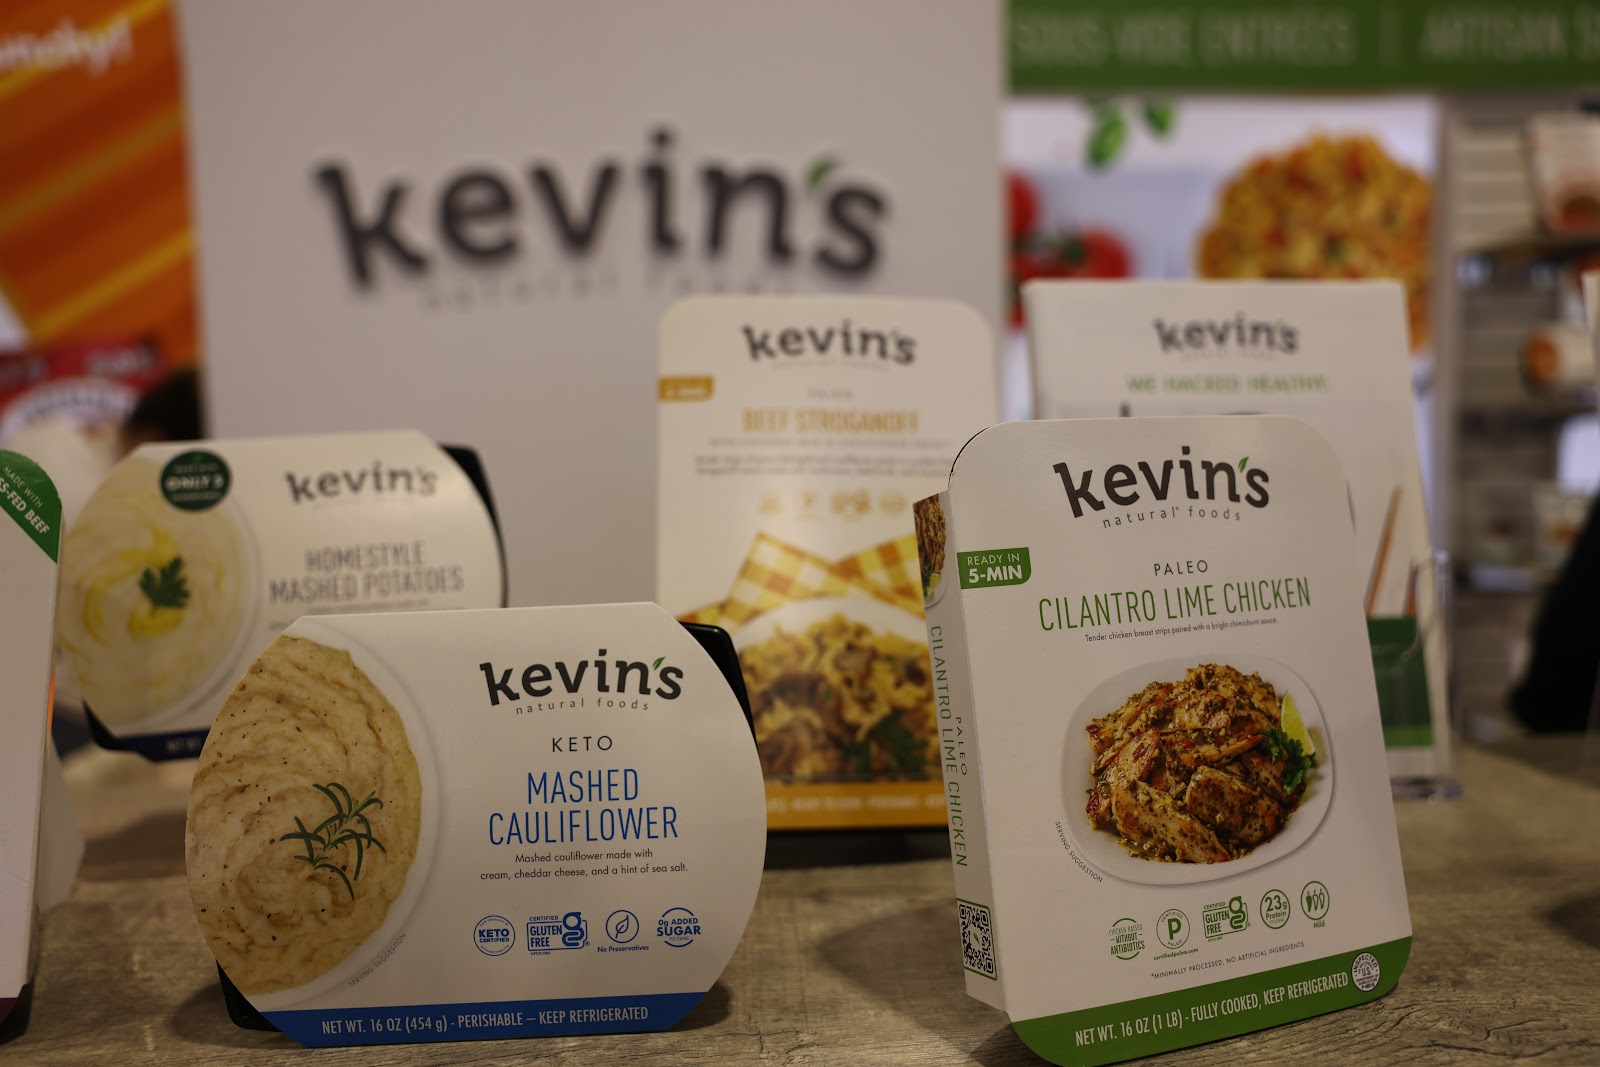 kevin's natural foods at expo east 2022